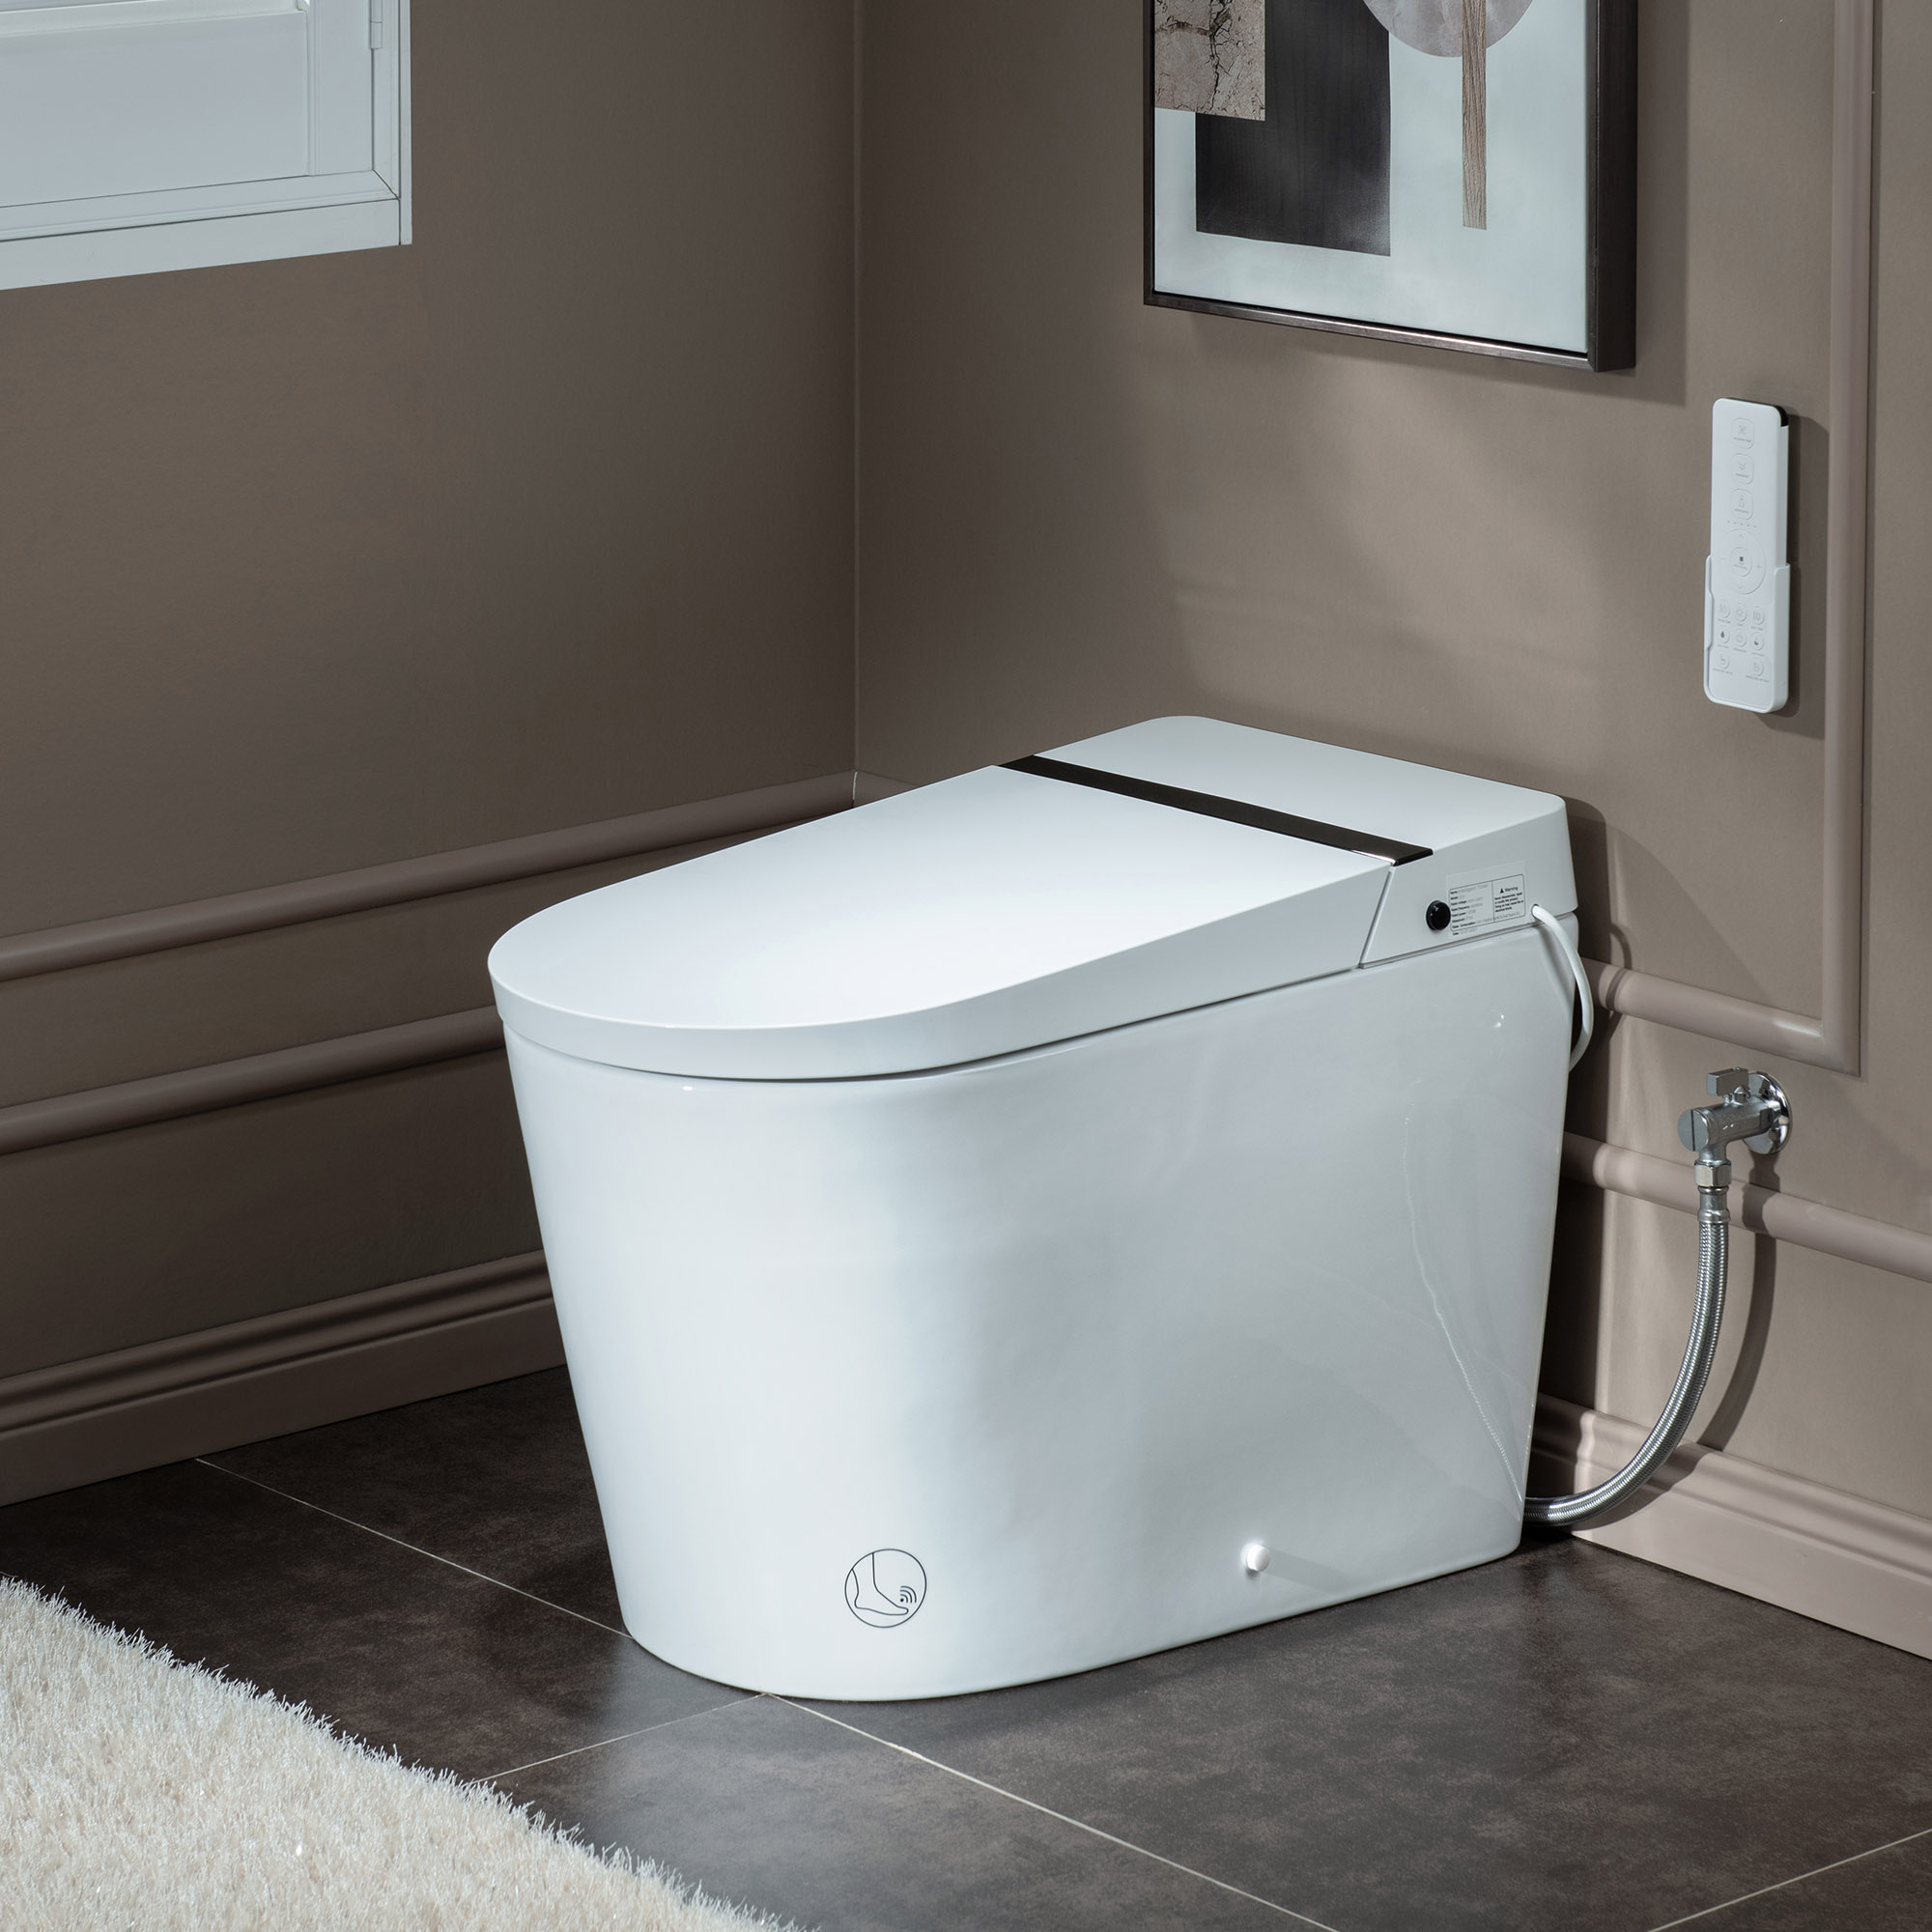  WOODBRIDGE B0990S One Piece Elongated Smart Toilet Bidet with Auto Open & Close, Auto Flush, Foot Sensor Flush, LED Temperature Display, Heated Seat and Integrated Multi Function Remote Control, White_2110